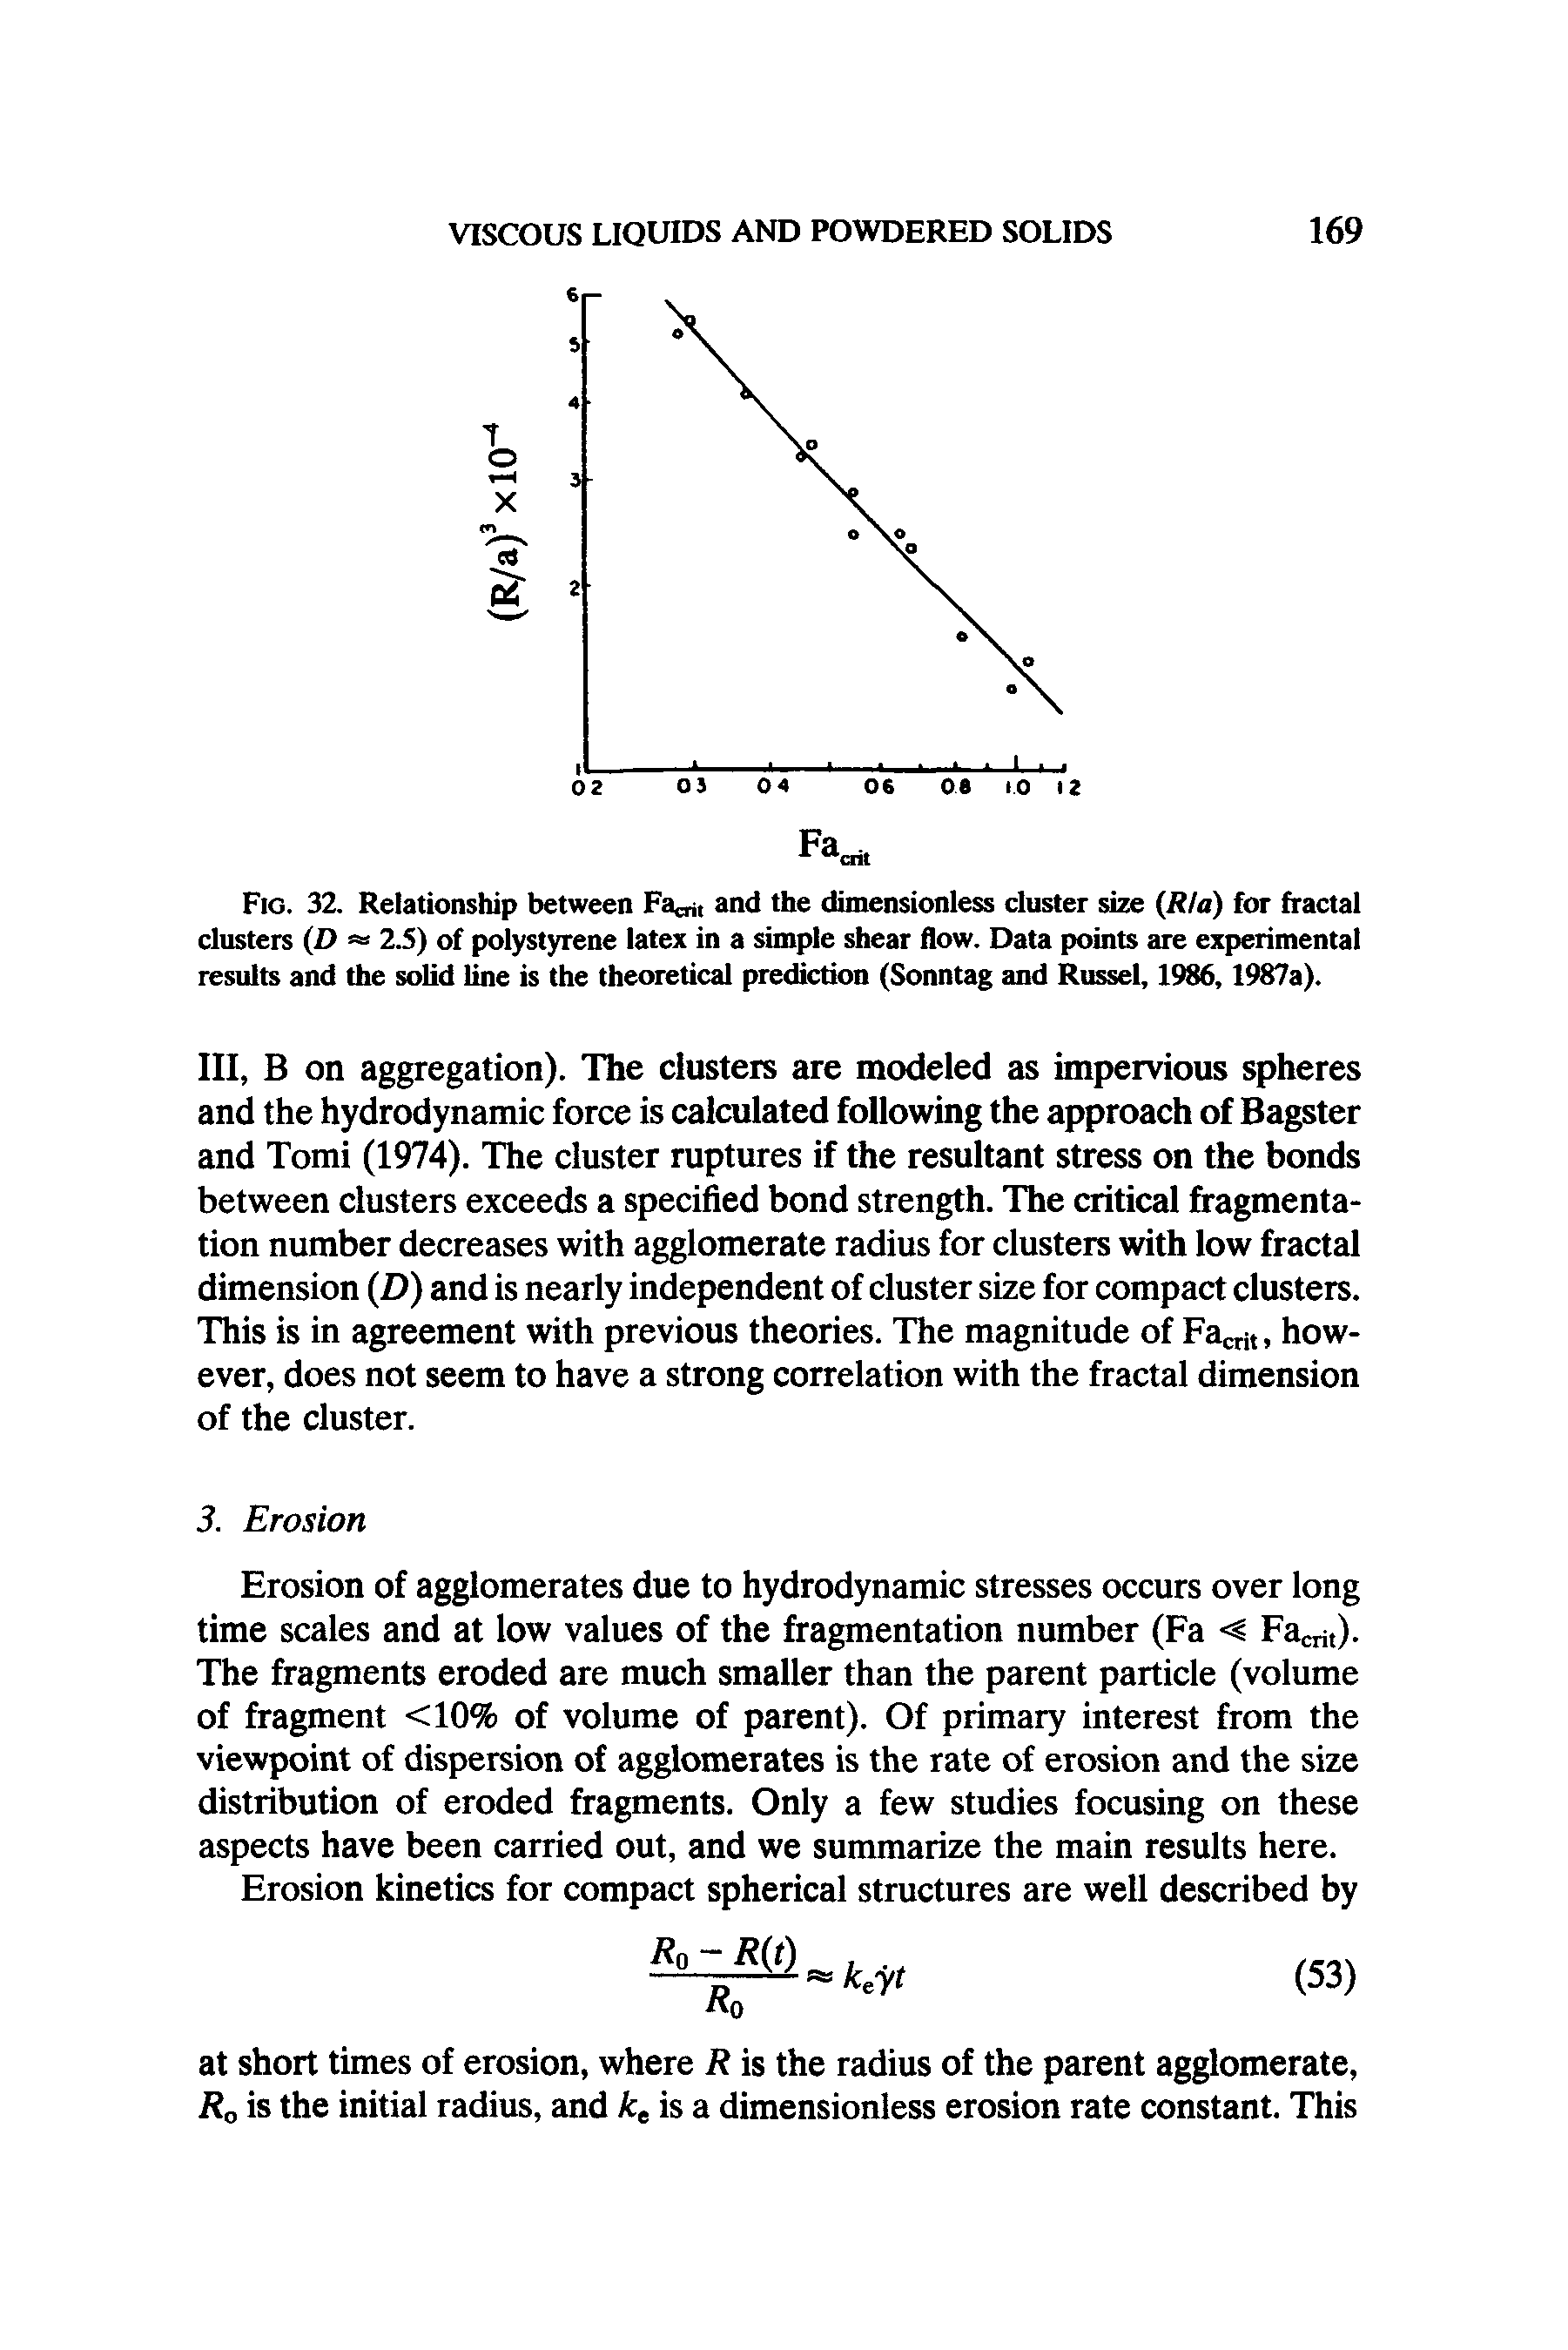 Fig. 32. Relationship between Fa, and the dimensionless cluster size (Rla) for fractal clusters (D 2.5) of polystyrene latex in a simple shear flow. Data points are experimental results and the solid line is the theoretical prediction (Sonntag and Russel, 1986,1987a).